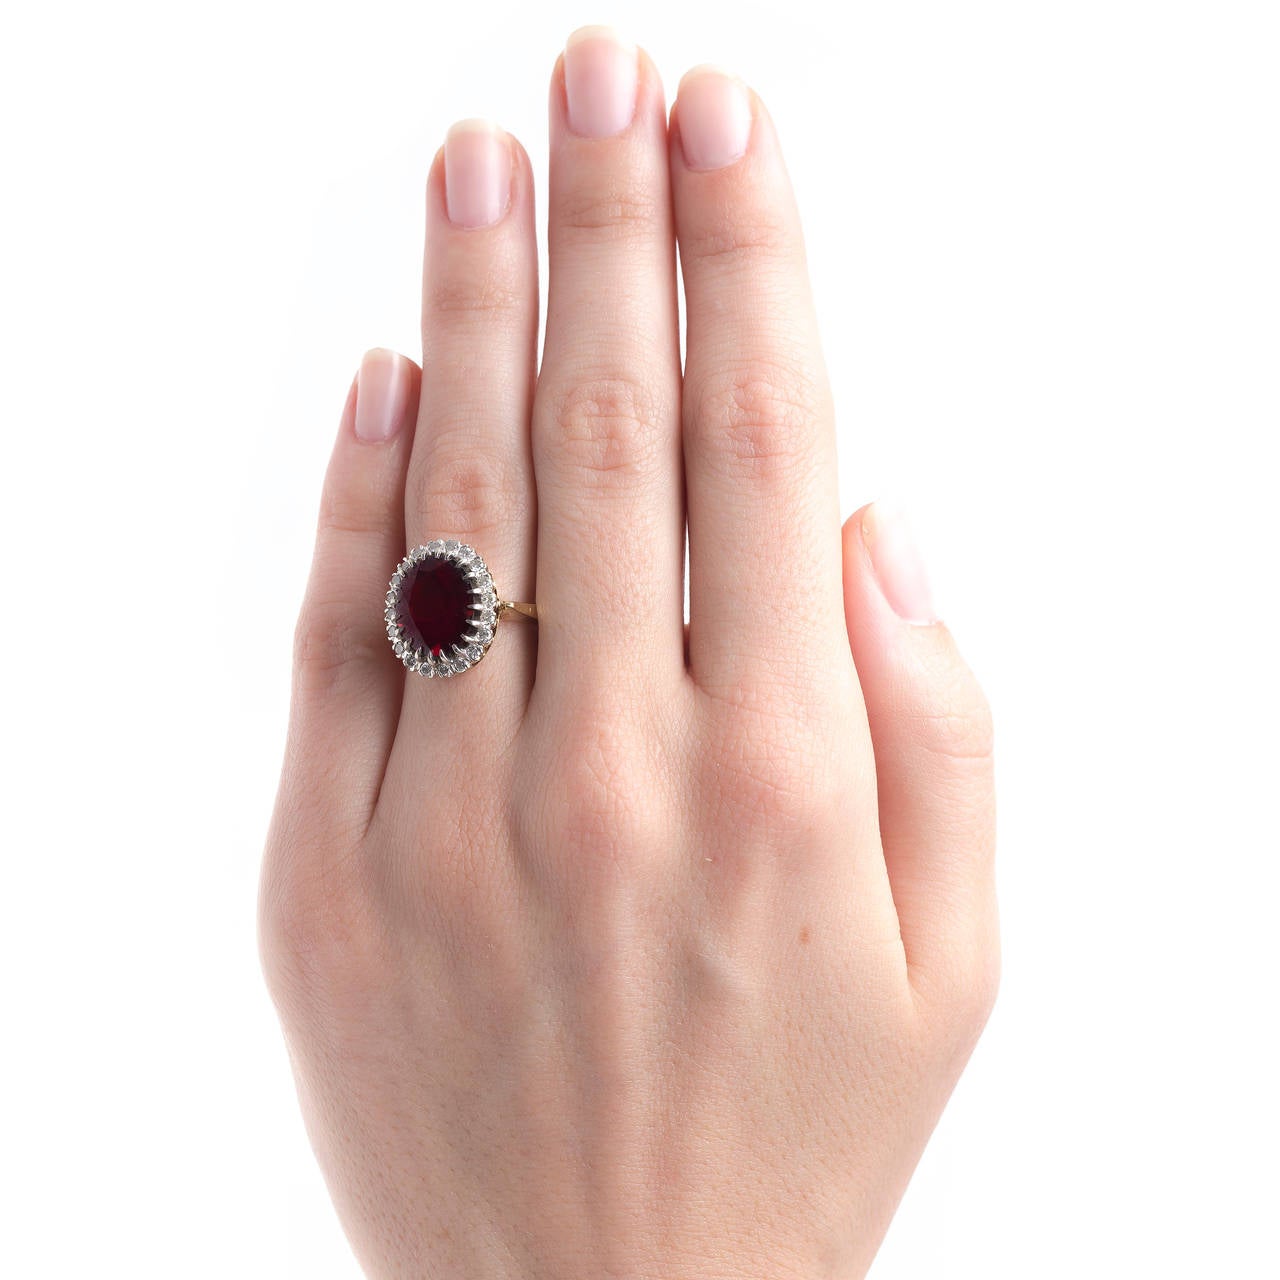 Peppertree Lane is a fantastic authentic Retro era (circa 1945) 14k yellow and white gold ring centering an oval slightly brownish-red Oval garnet gauged at 5.50ct surrounded by a beautiful halo of twenty Round Brilliant Cut diamonds totaling